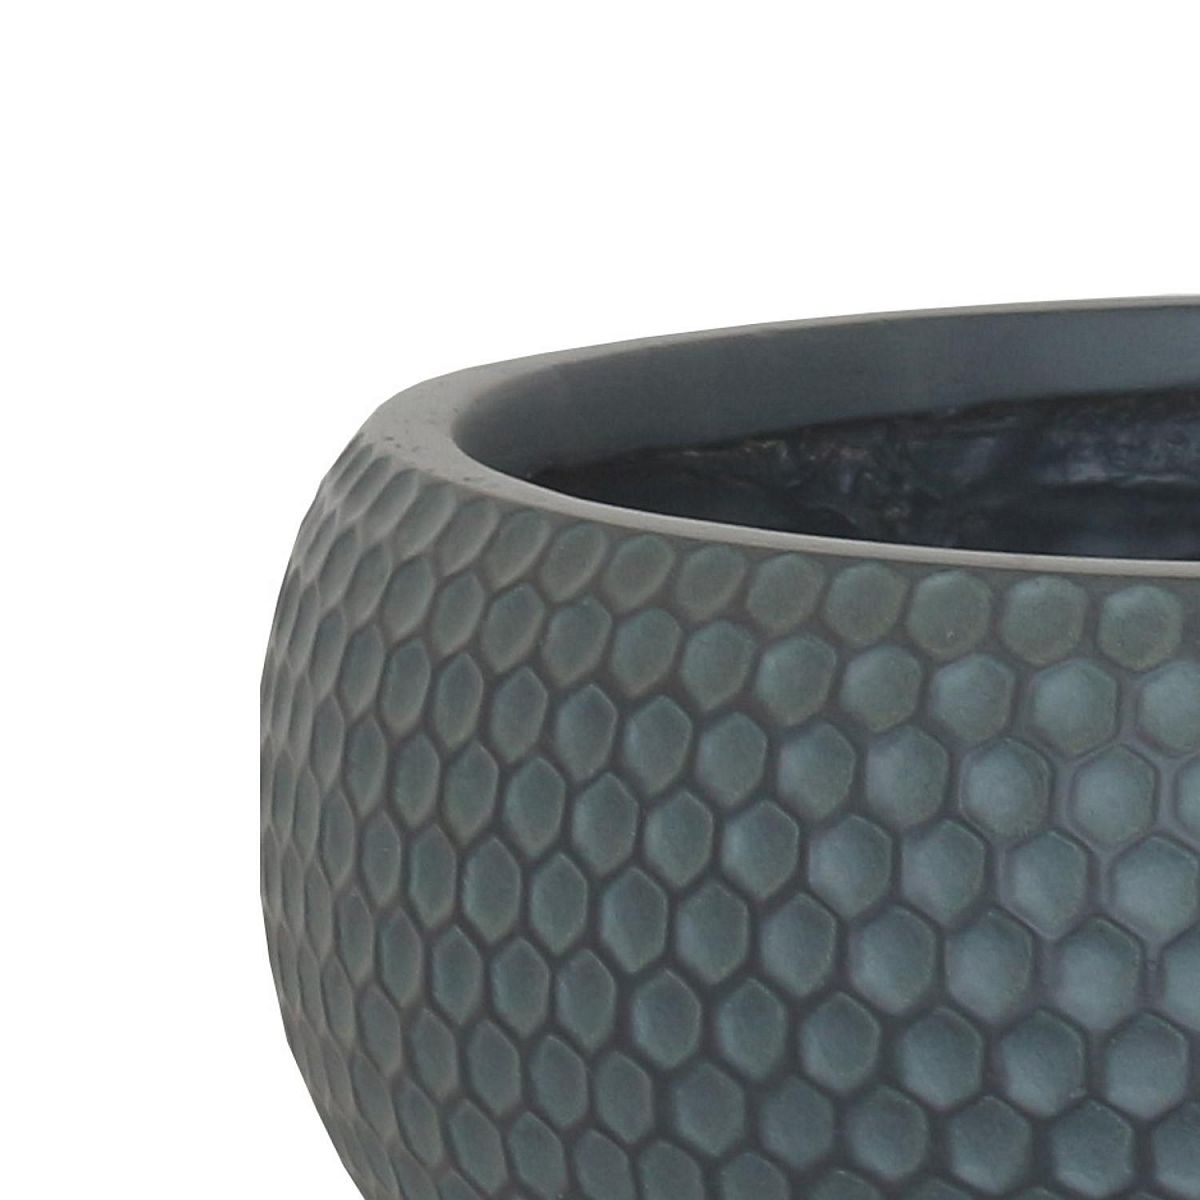 Honeycomb Style Bowl Outdoor Planter by Idealist Lite